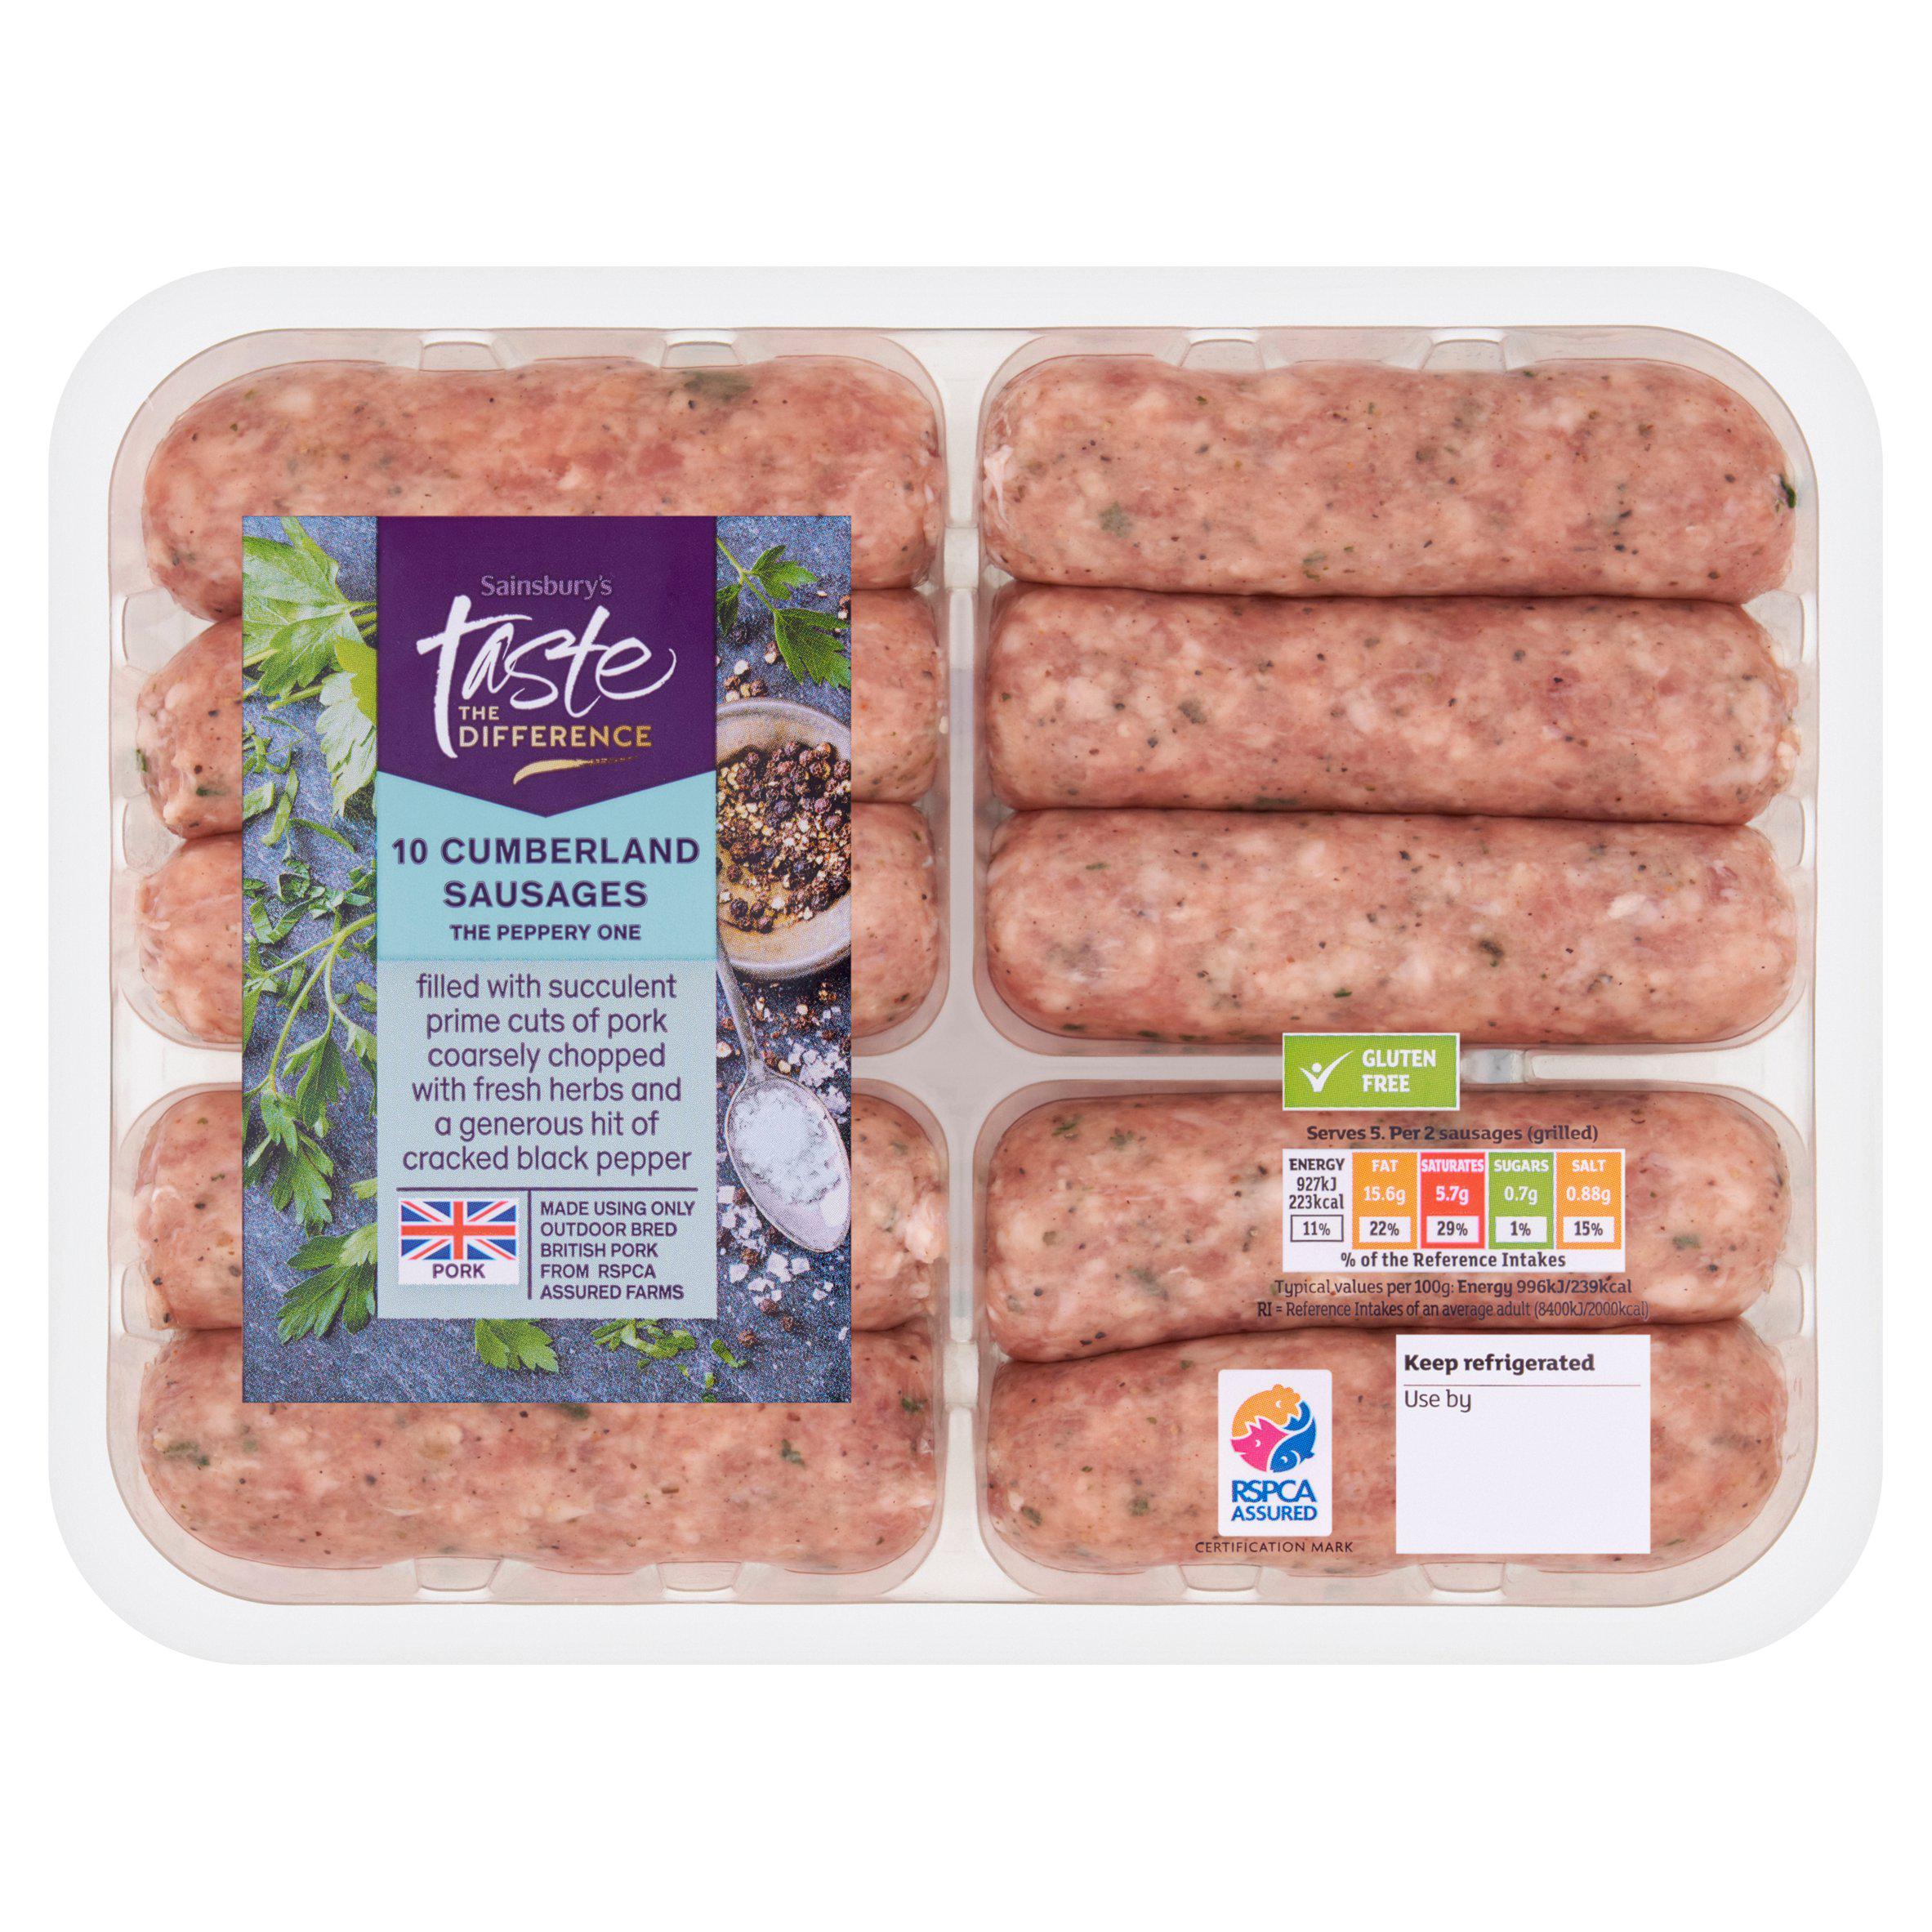 Sainsbury's Cumberland Sausages, Taste the Difference x10 667g